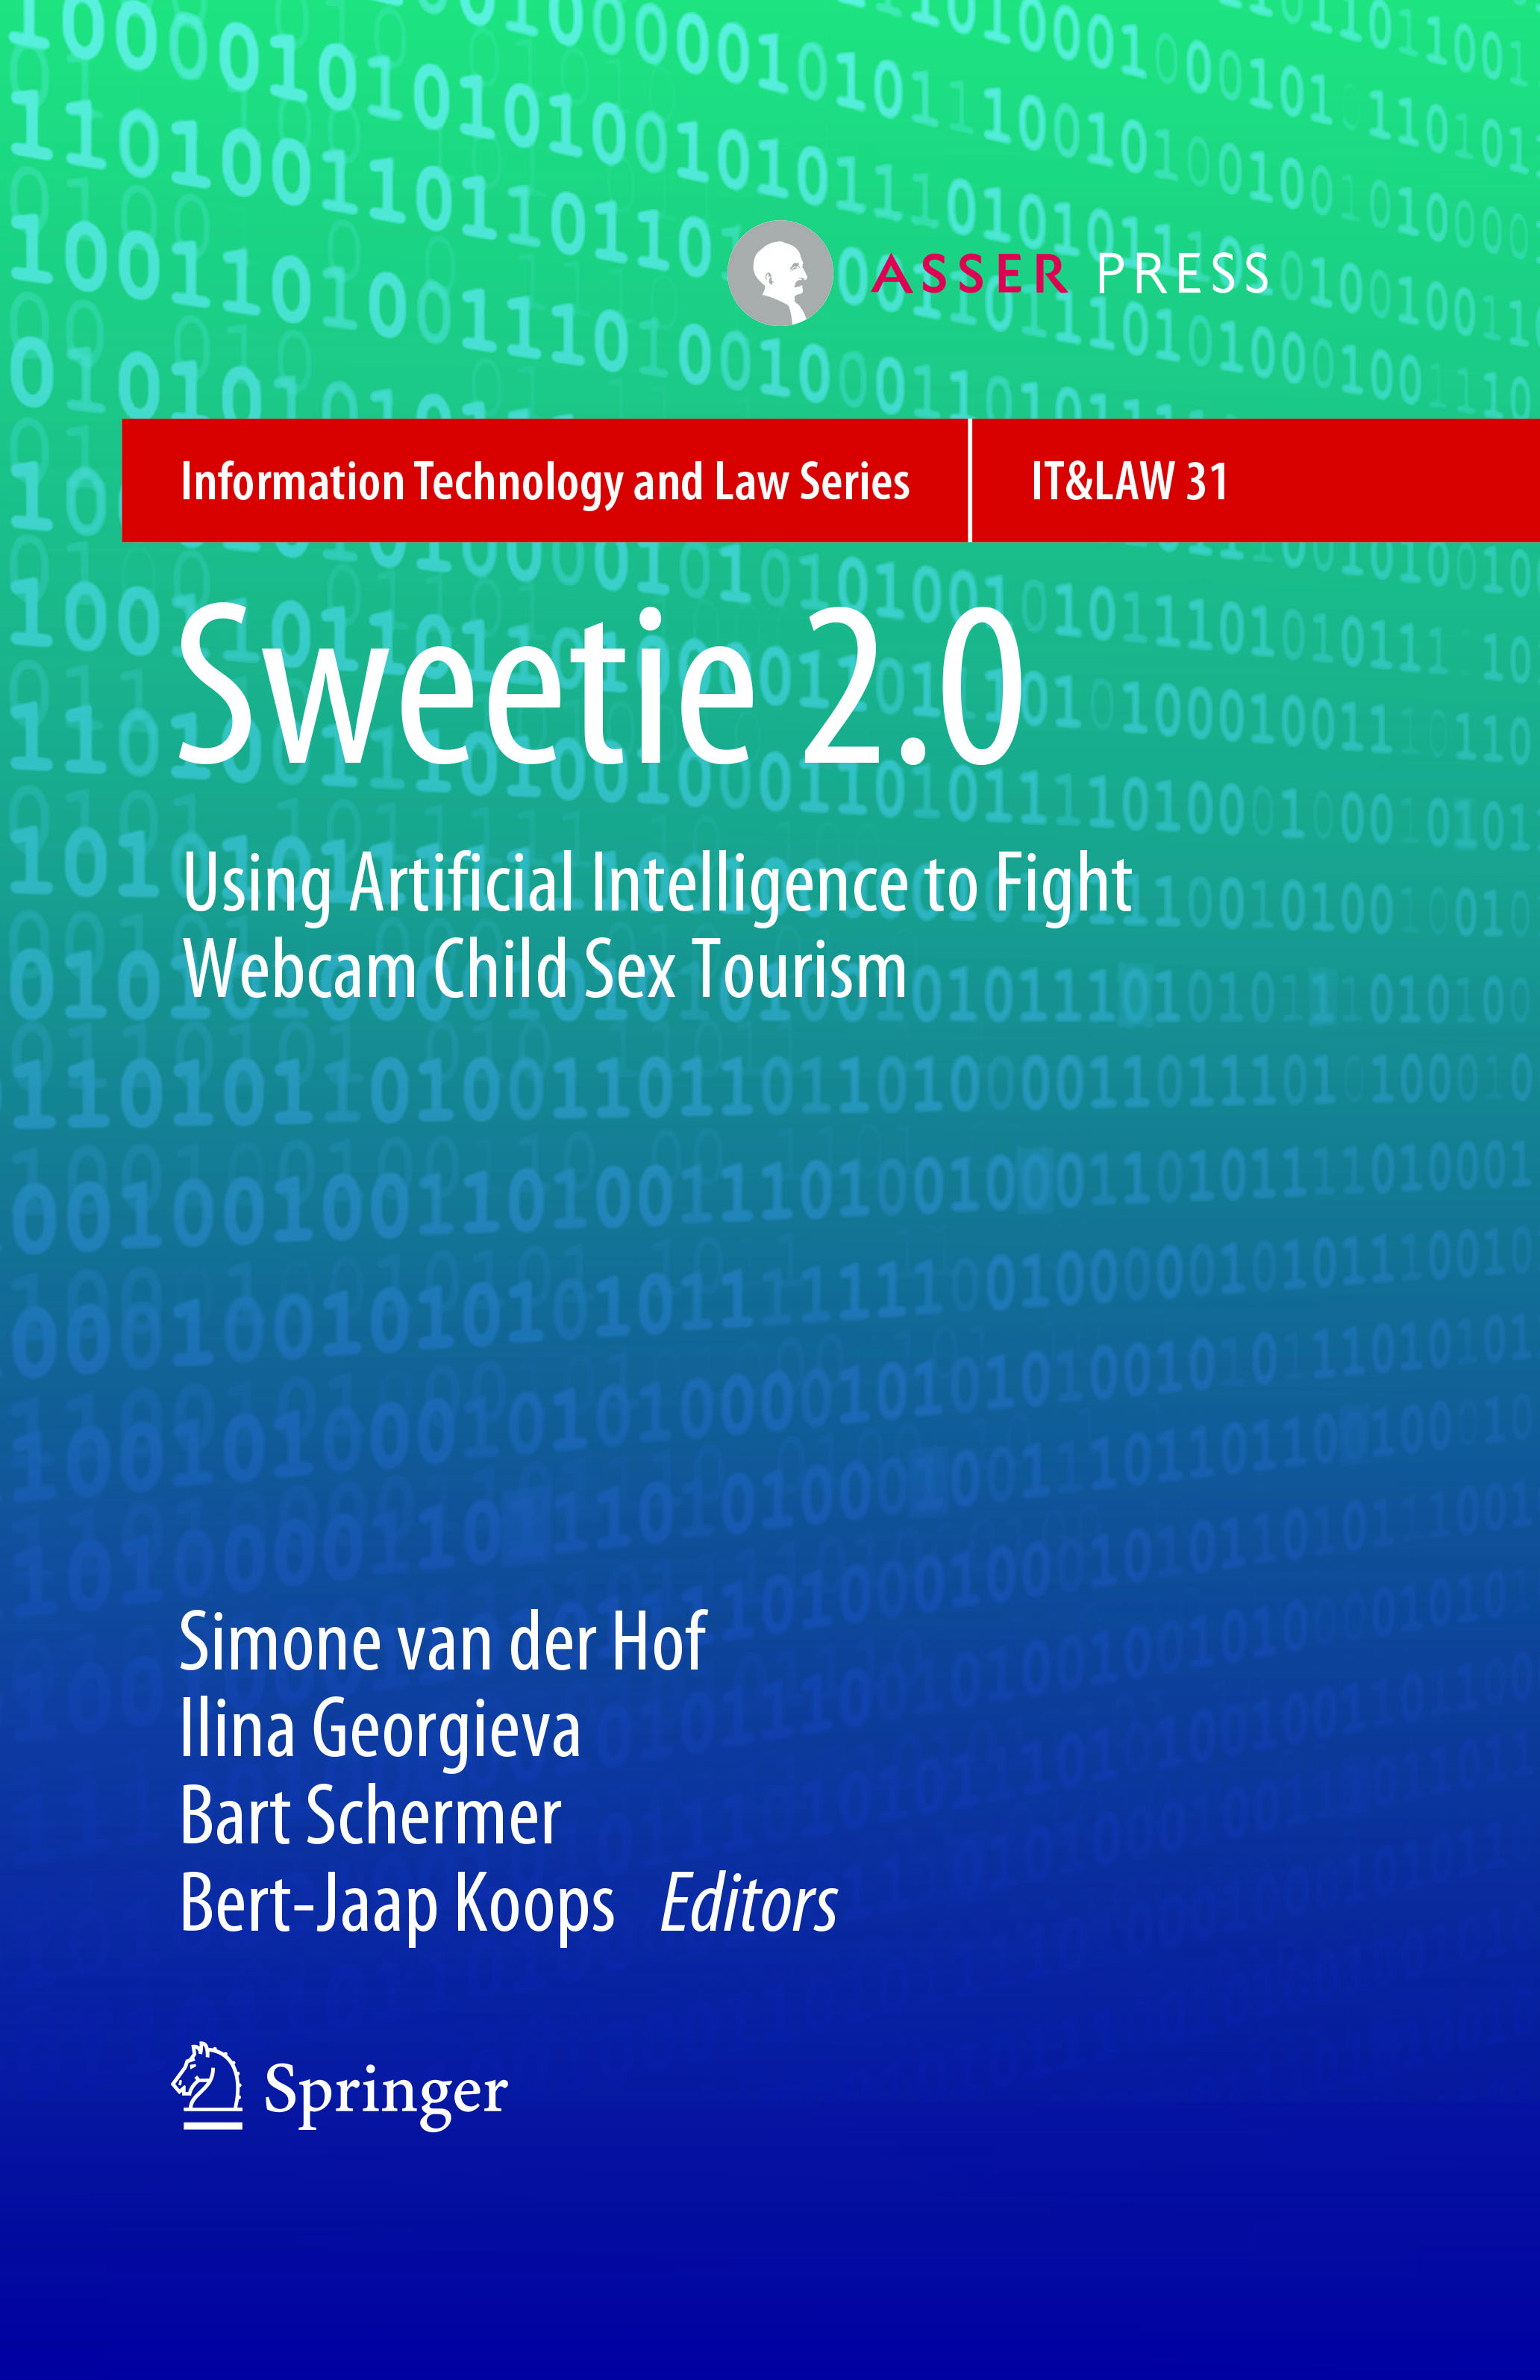 Sweetie 2.0 - Using Artificial Intelligence to Fight Webcam Child Sex Tourism